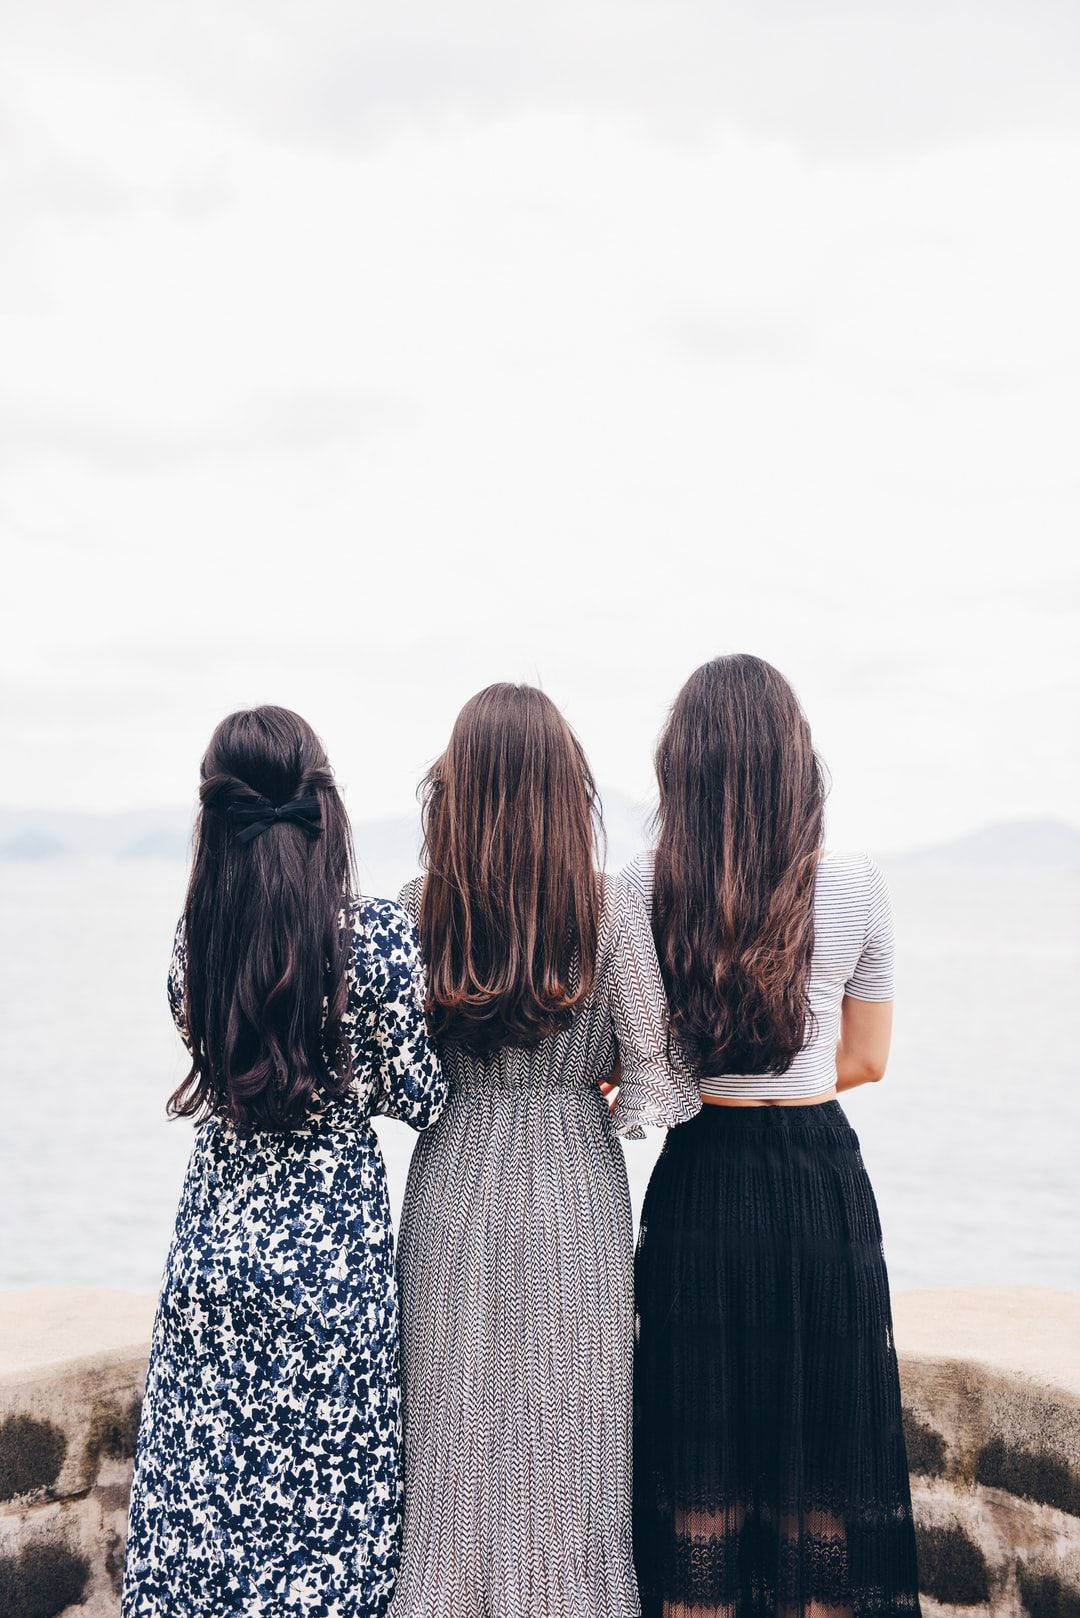 Group Of Girls With Backs Turned Wallpaper